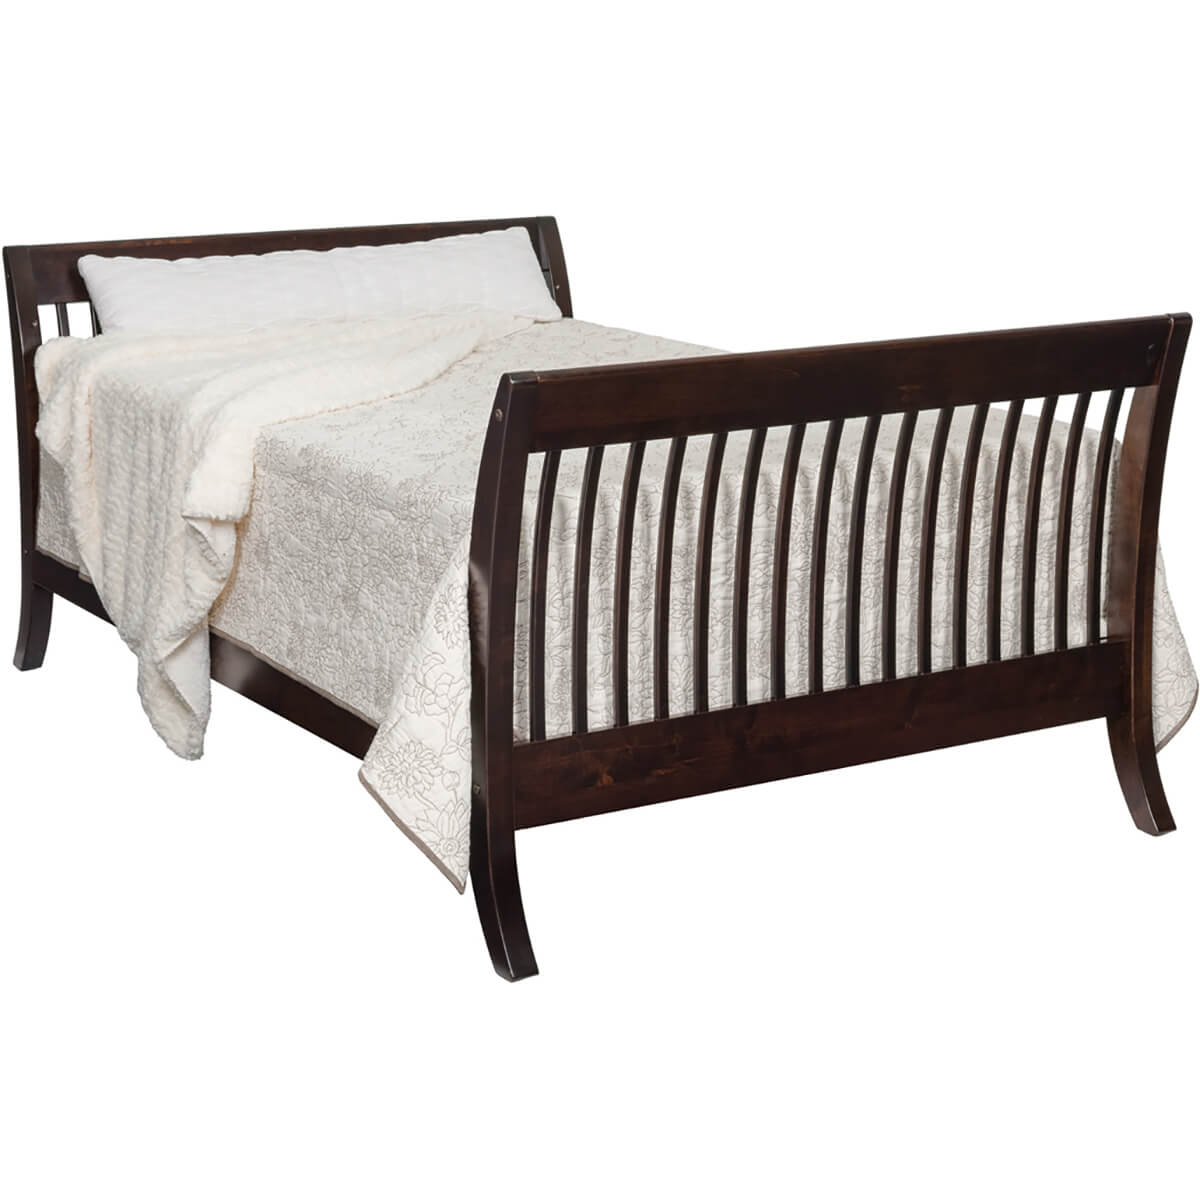 Read more about the article Manhattan Slat Convertible Crib – Full Bed Conversion